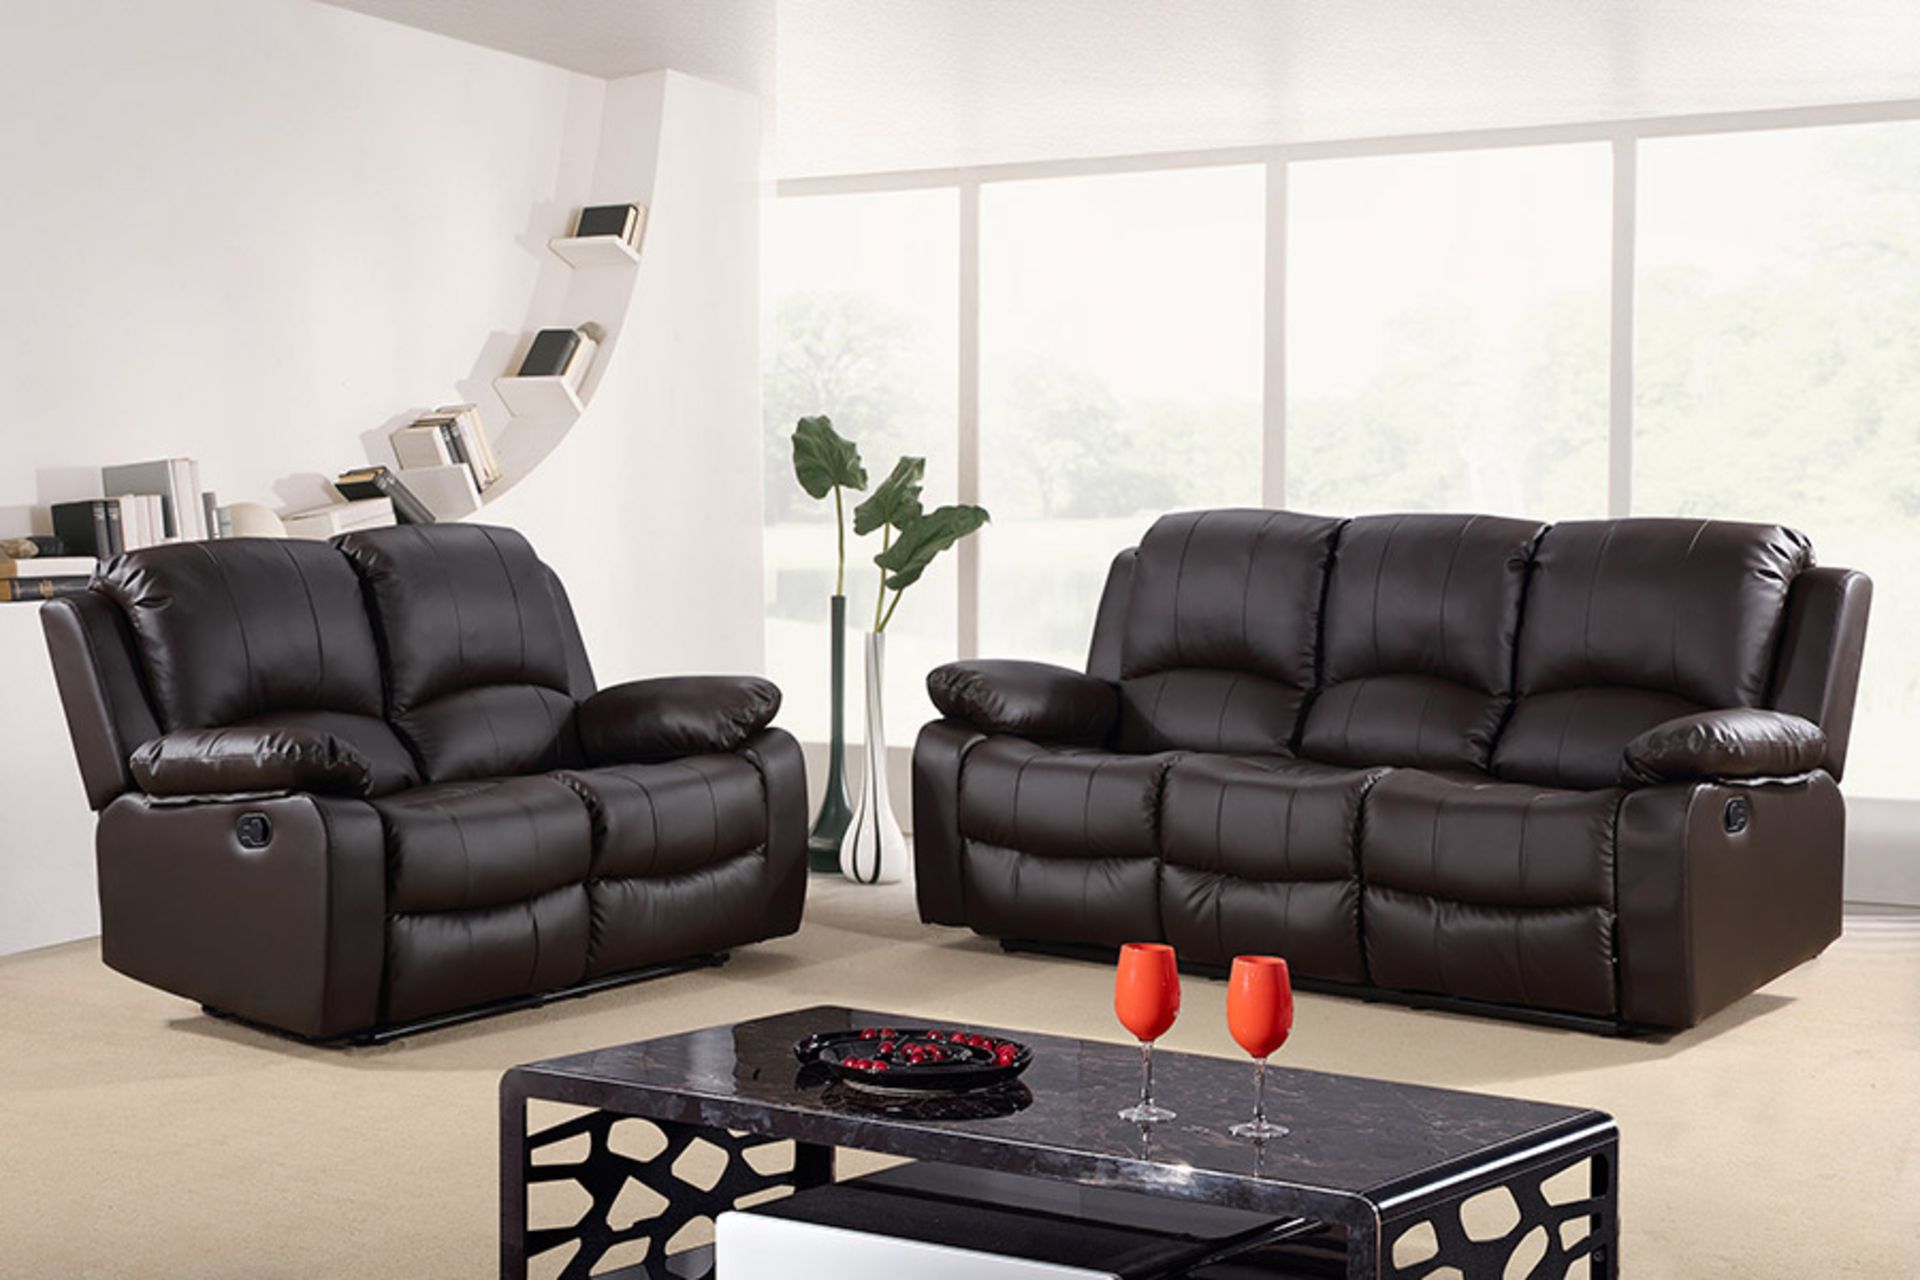 Brand New Boxed 3 seater plus 2 seater Supreme Brown Leather manual Reclining Sofas